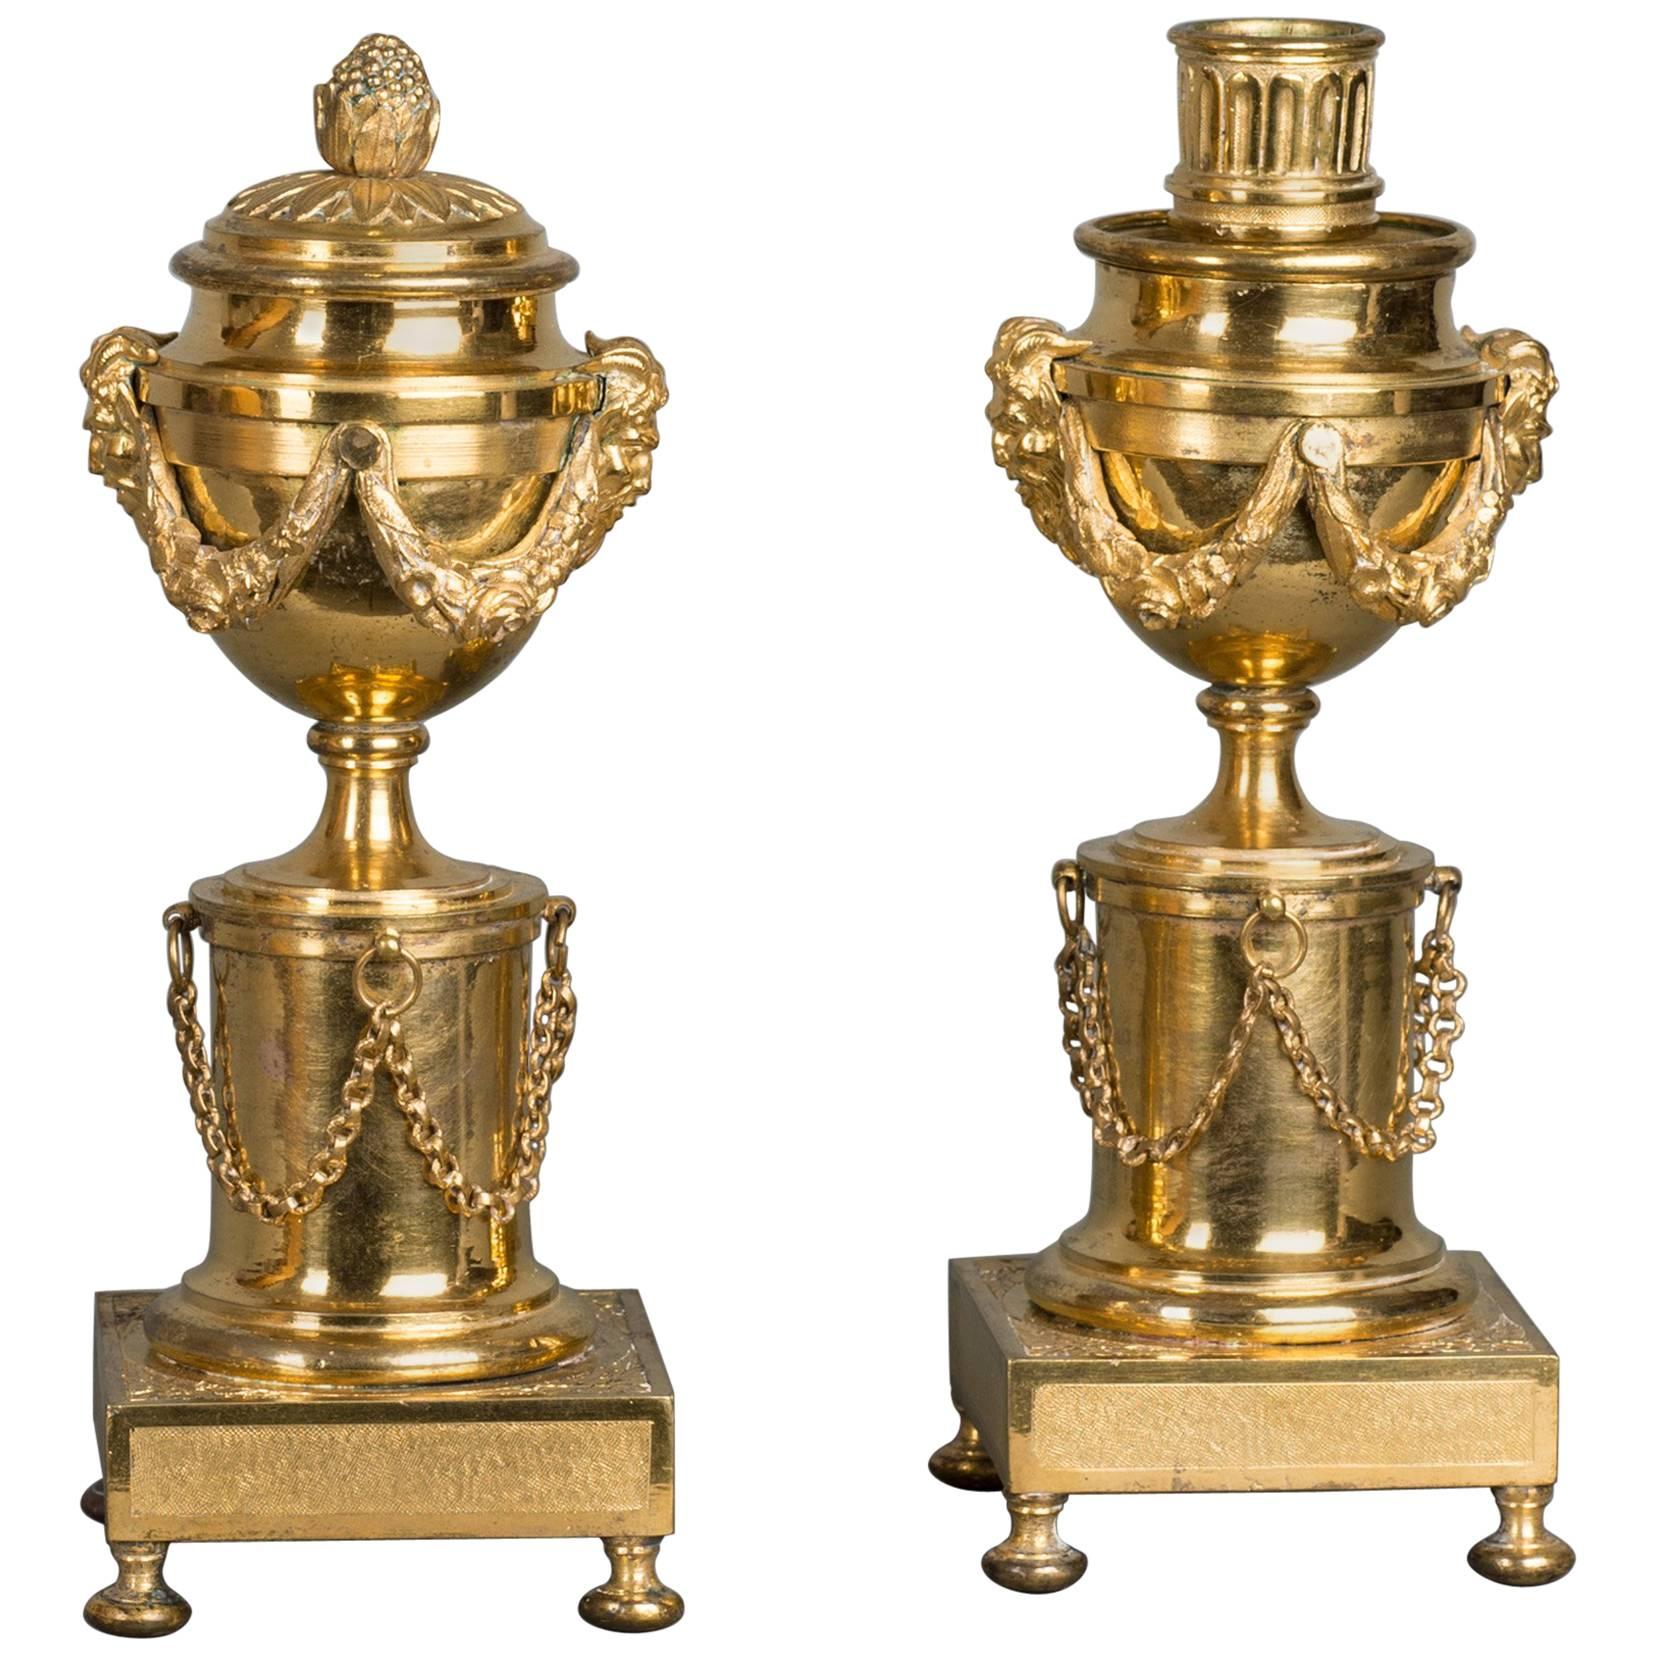 Very High Quality So Called Candle Sticks "a Double Usage", circa 1780 For Sale